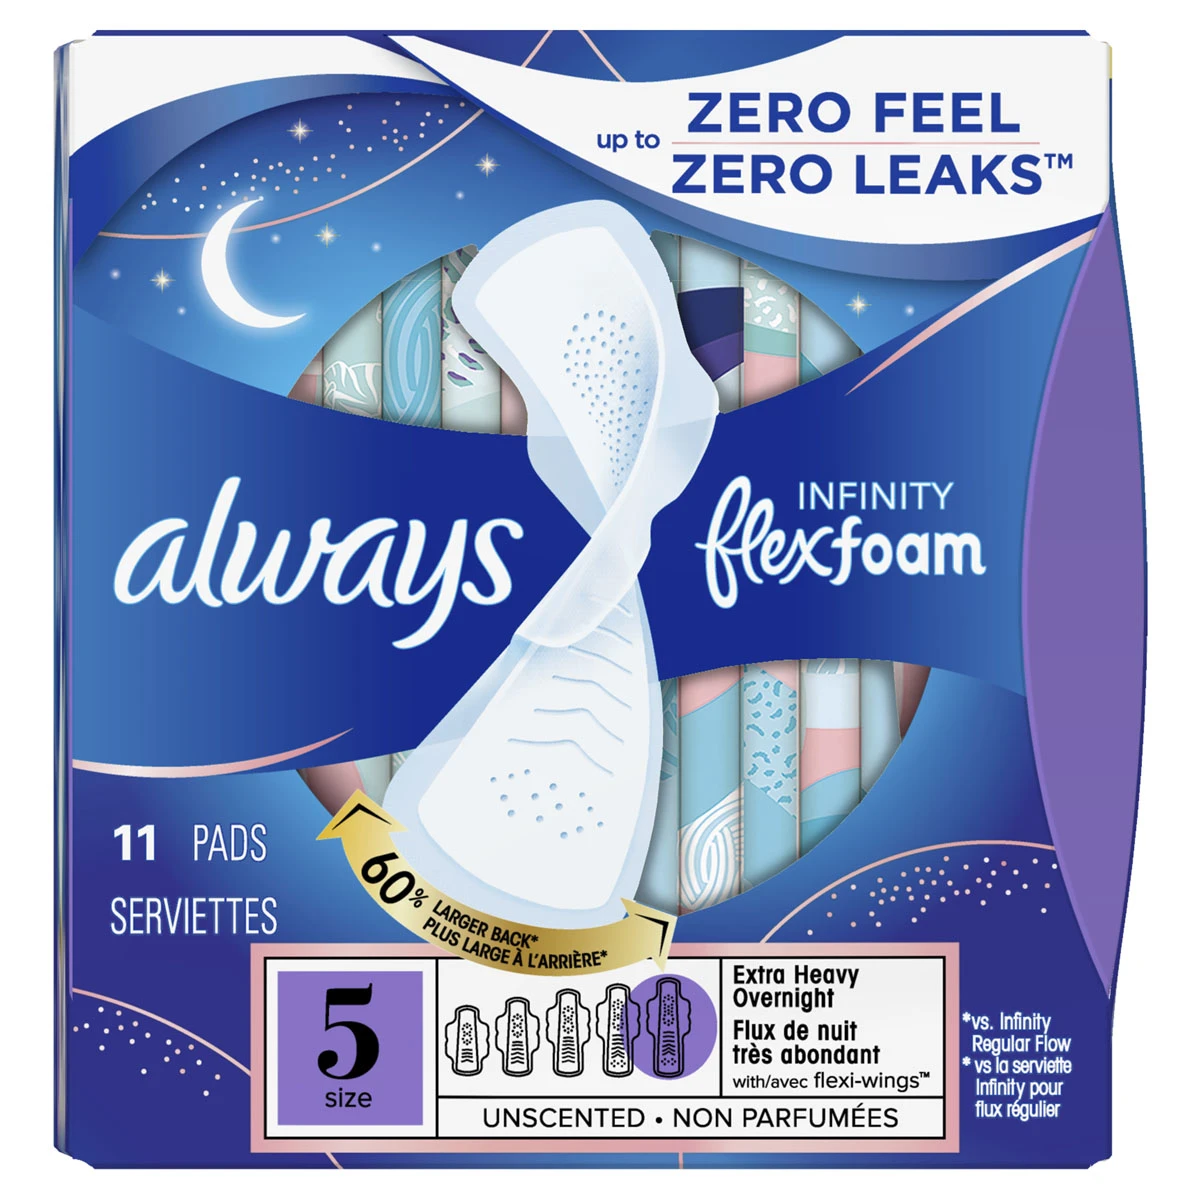 Always Zzz Pads and Underwear are as low as $2.99 at Kroger